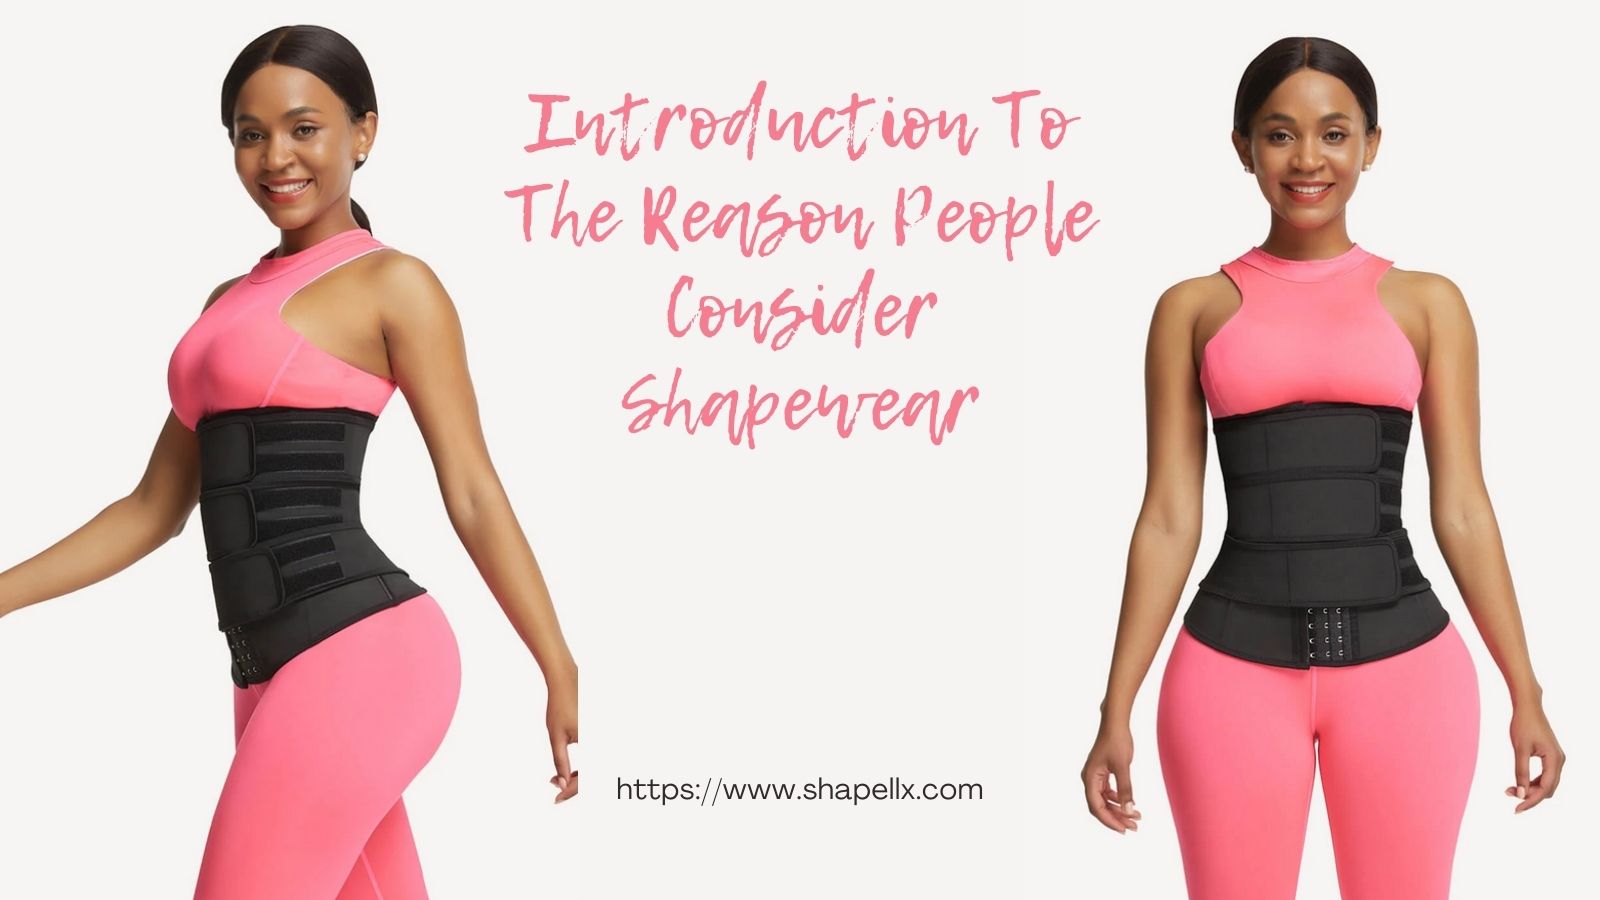 Introduction To The Reason People Consider Shapewear